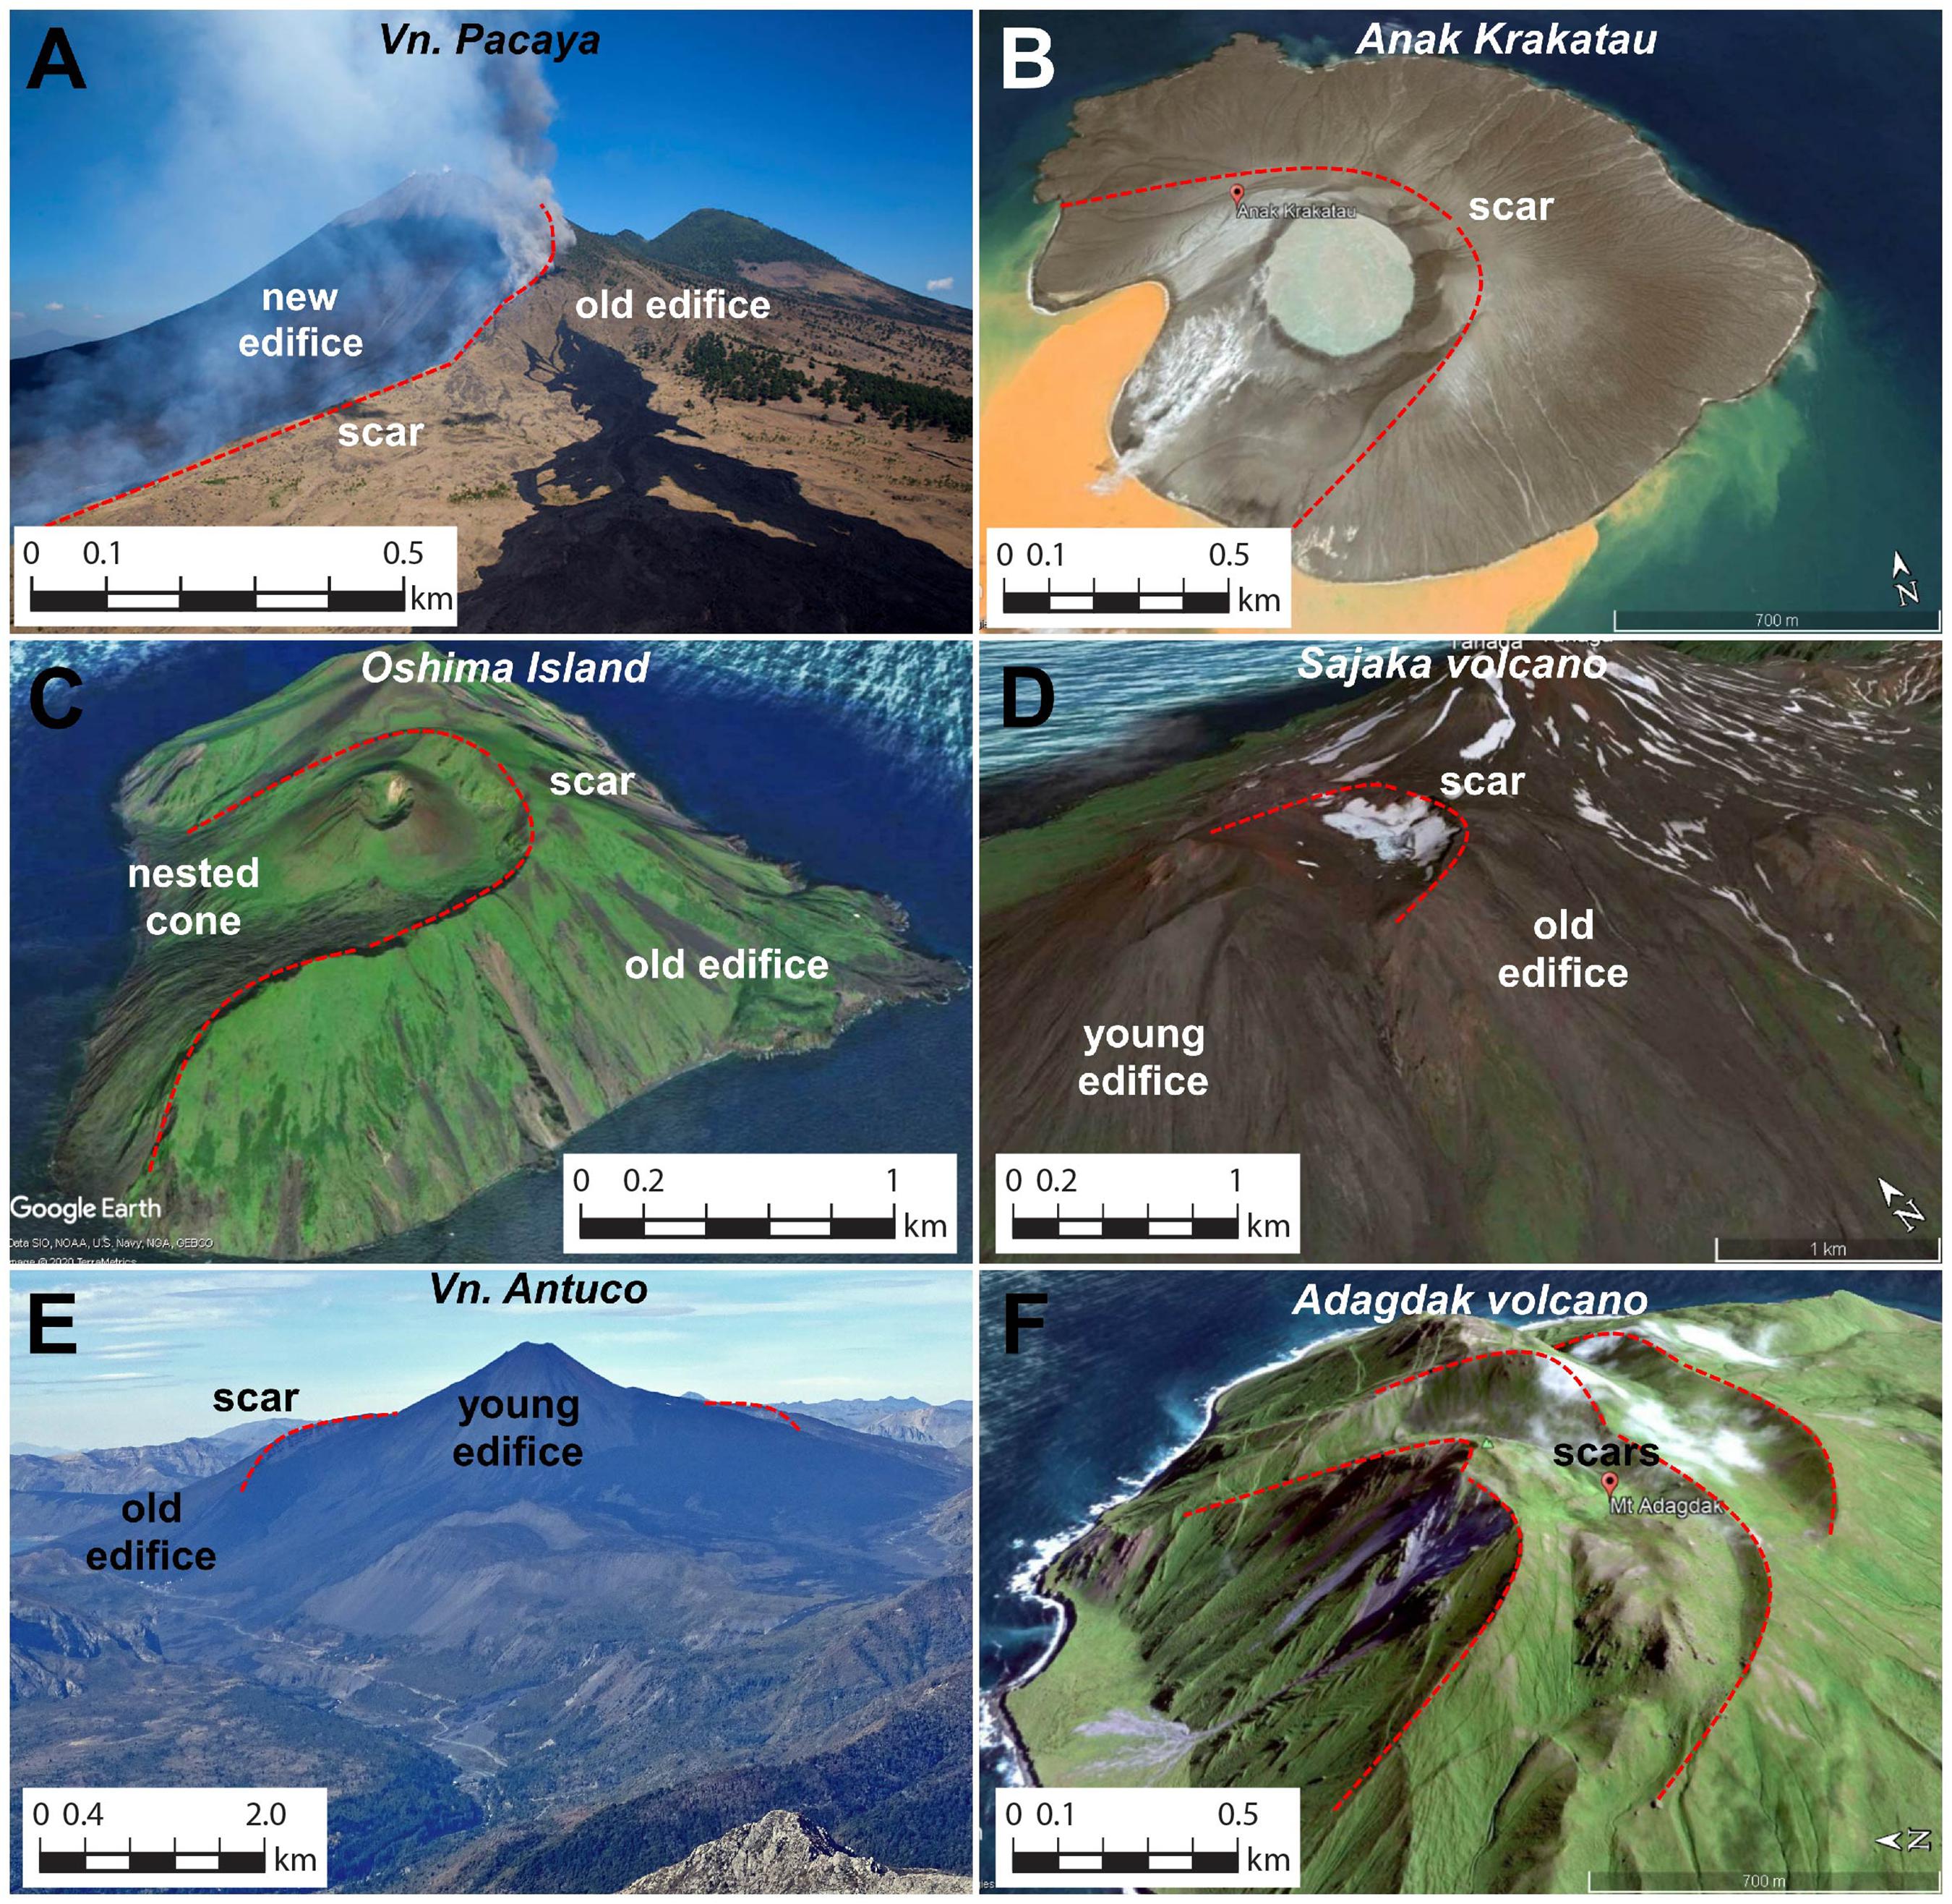 File:Volcan-Antuco-4.jpg - Wikimedia Commons